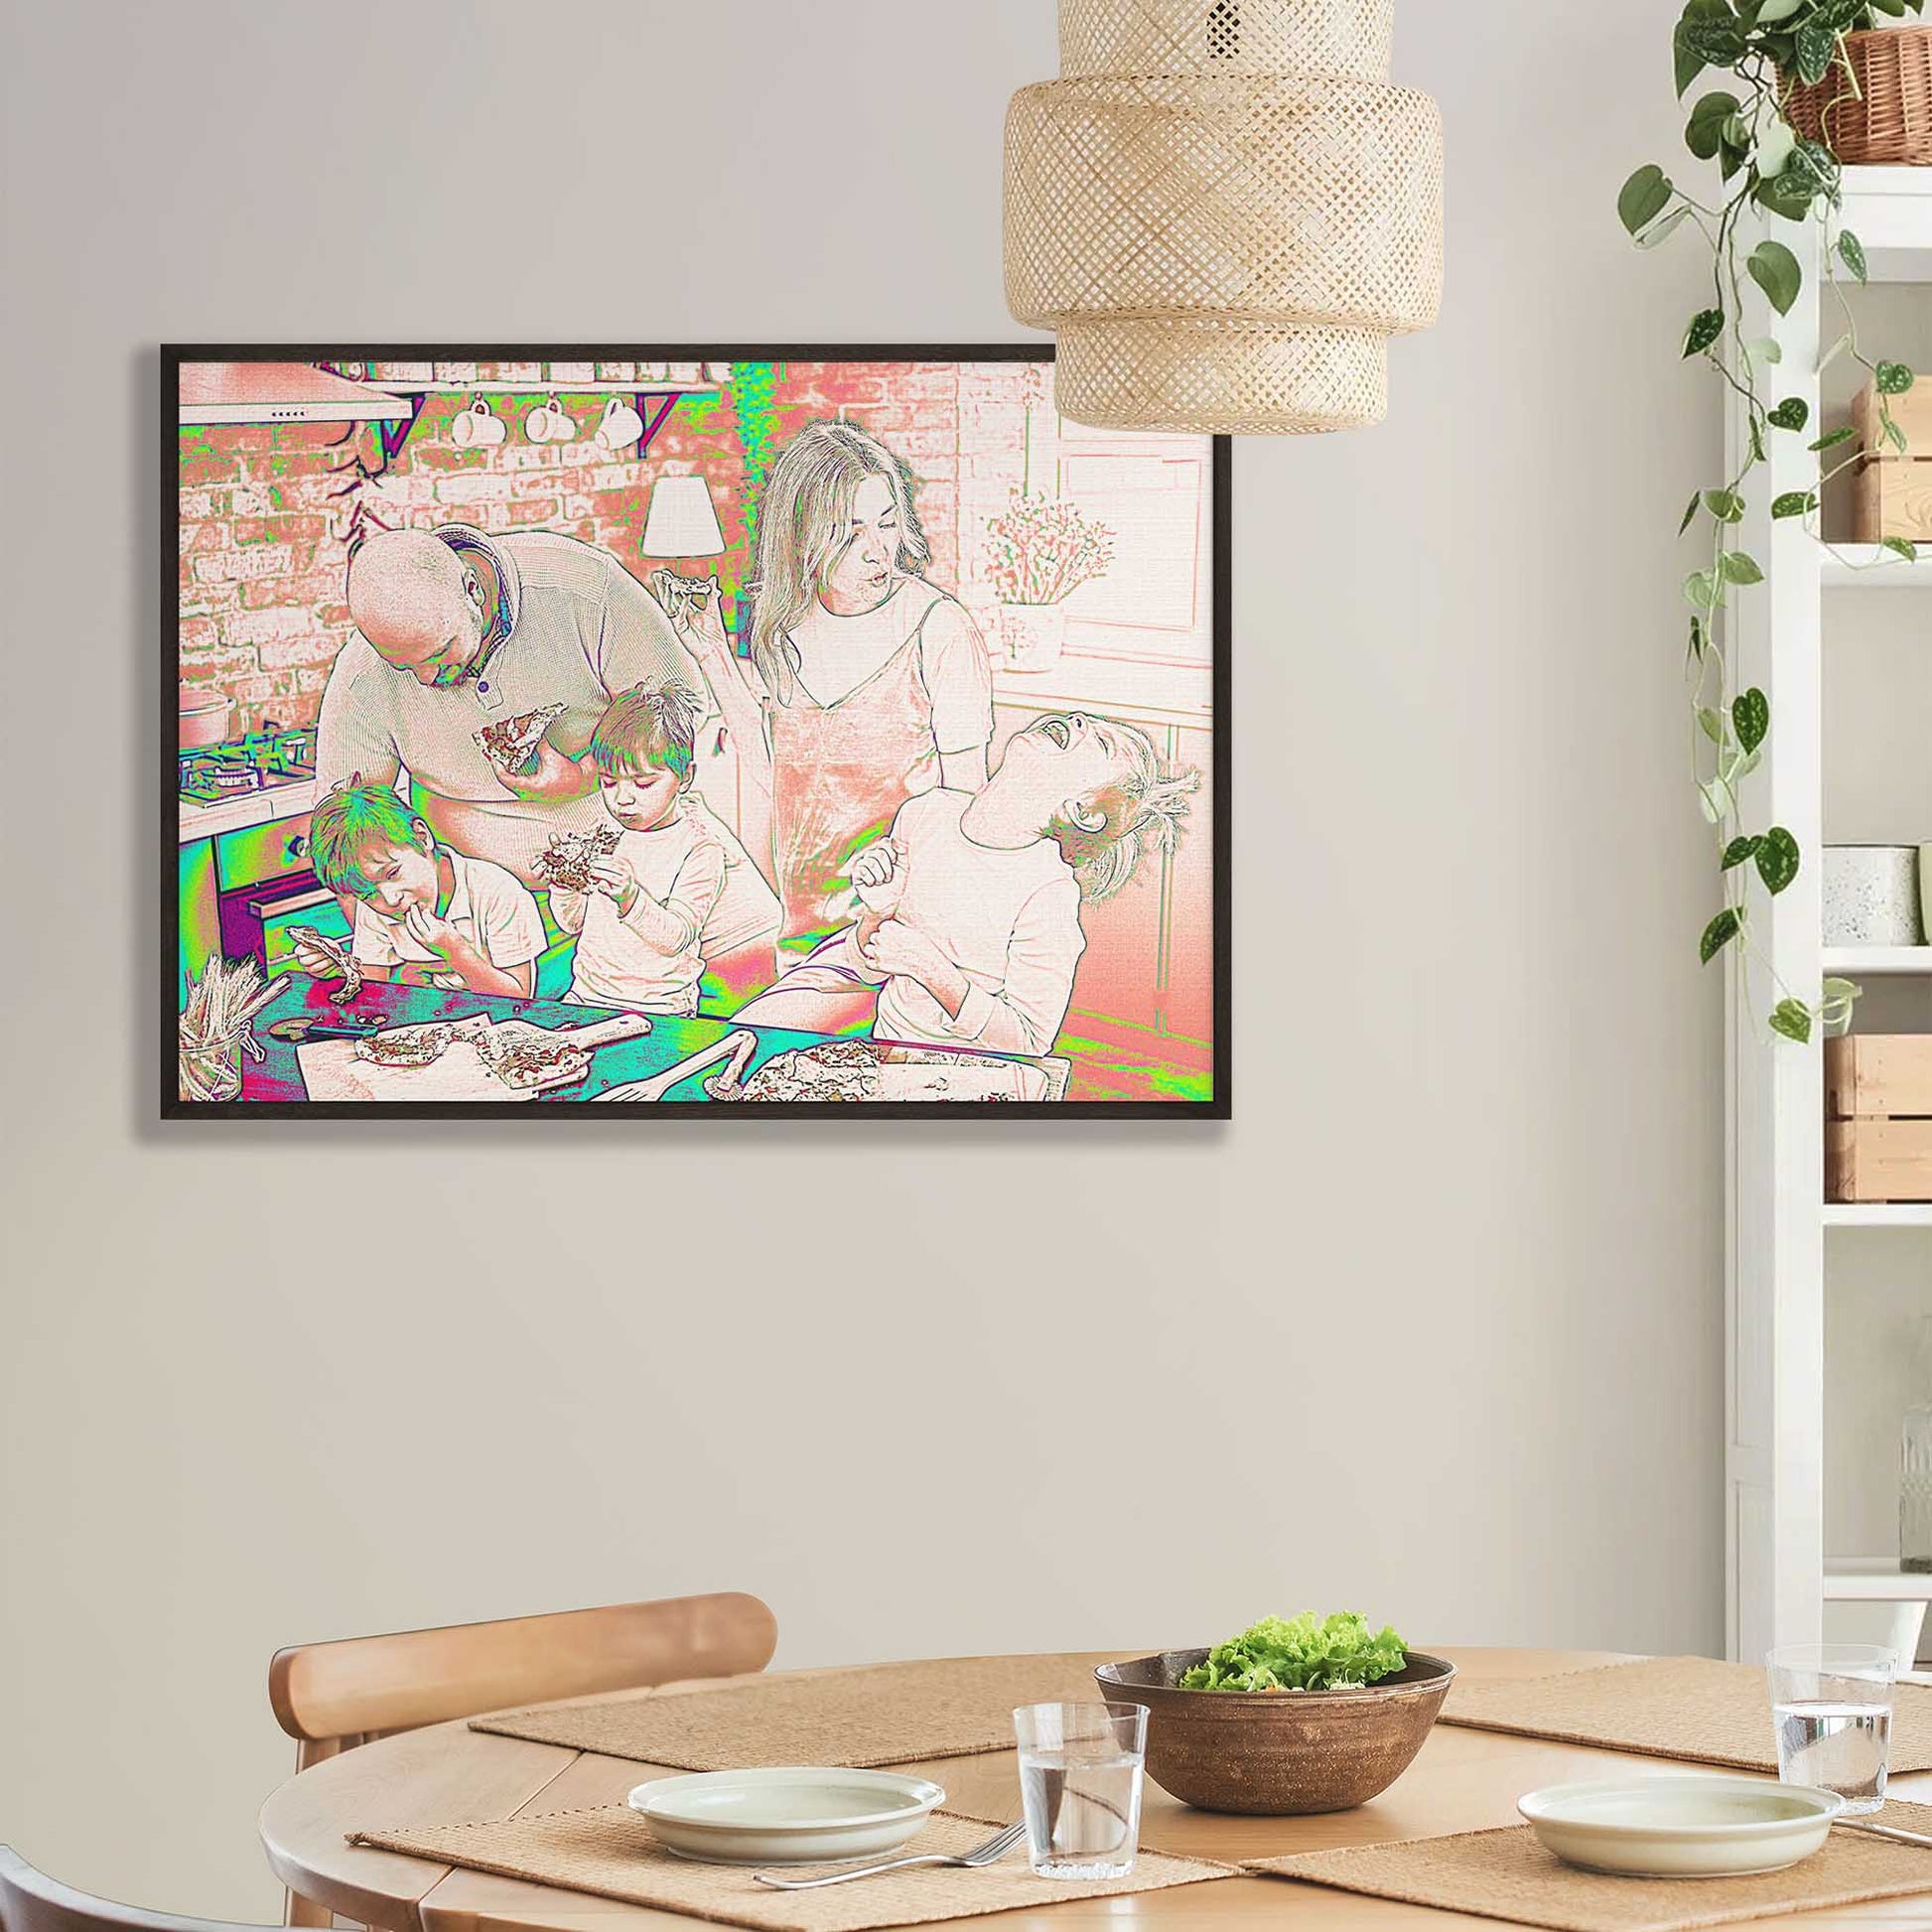 Cheerful Decoration for Your Home: Infuse your space with positivity and cheerfulness with this personalised pencil drawing framed print. Its vibrant colors and sharp lines create a cheerful atmosphere that uplifts the mood